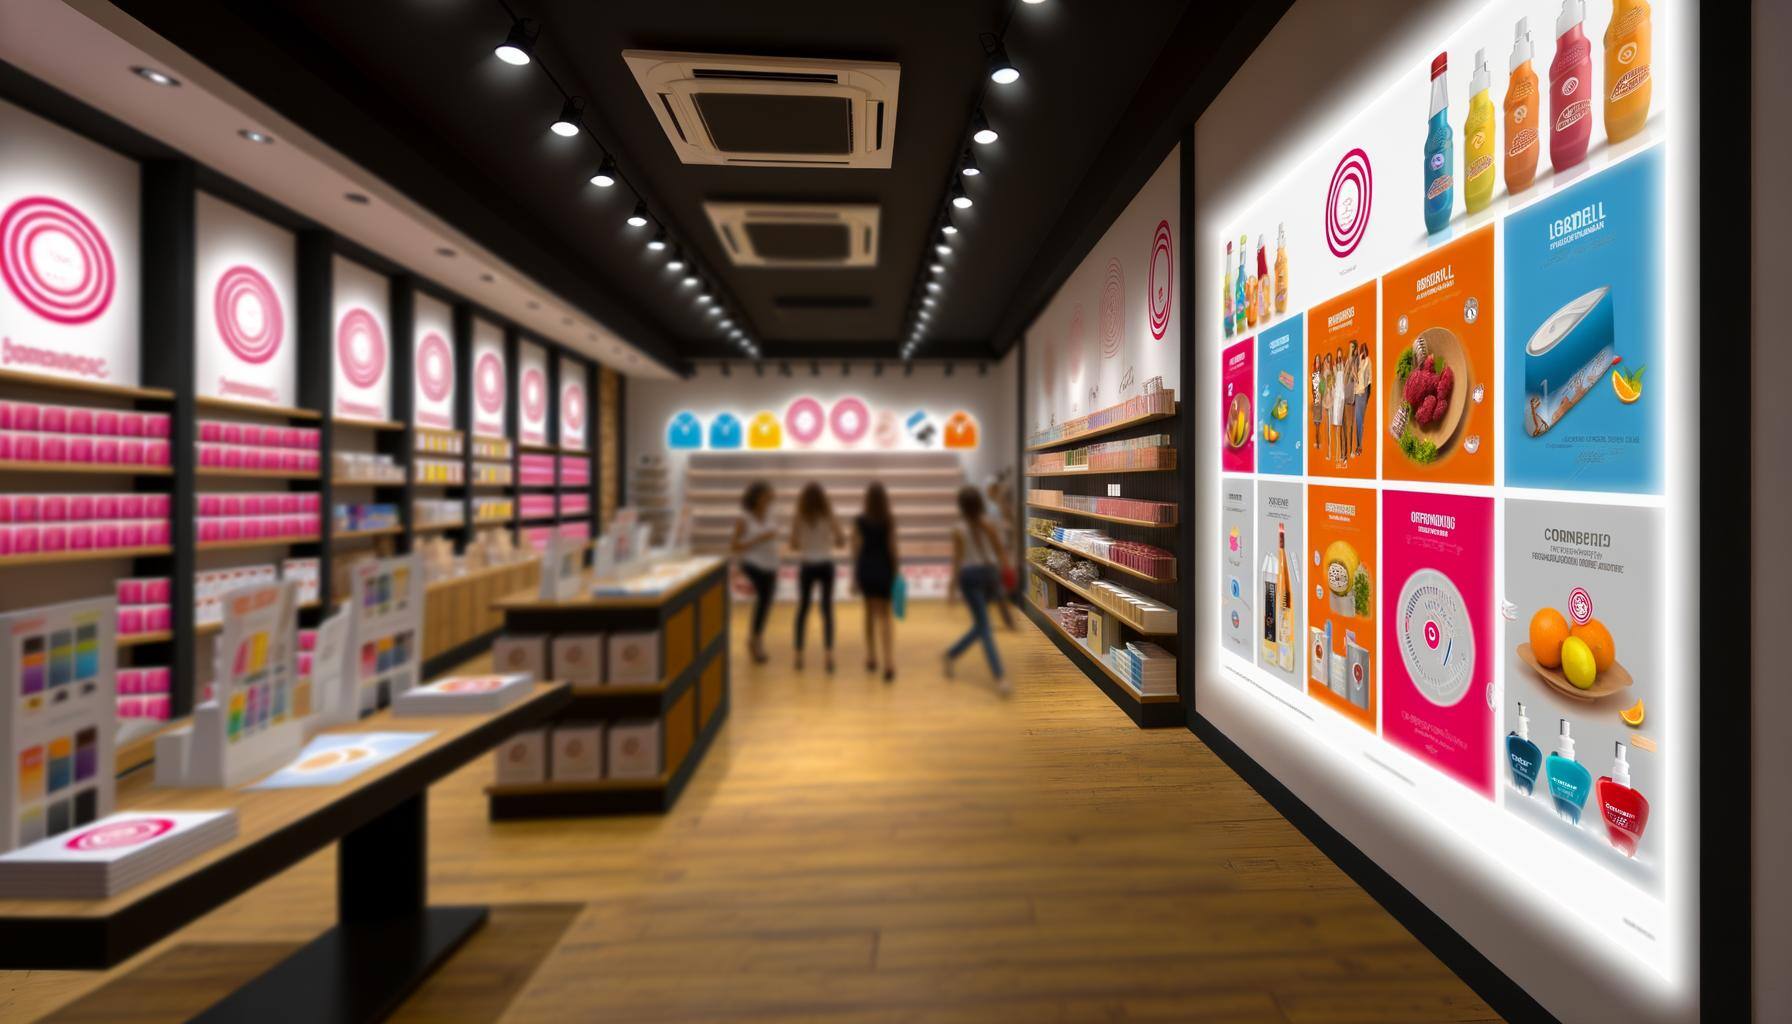 Retail branding ideas to help you save space